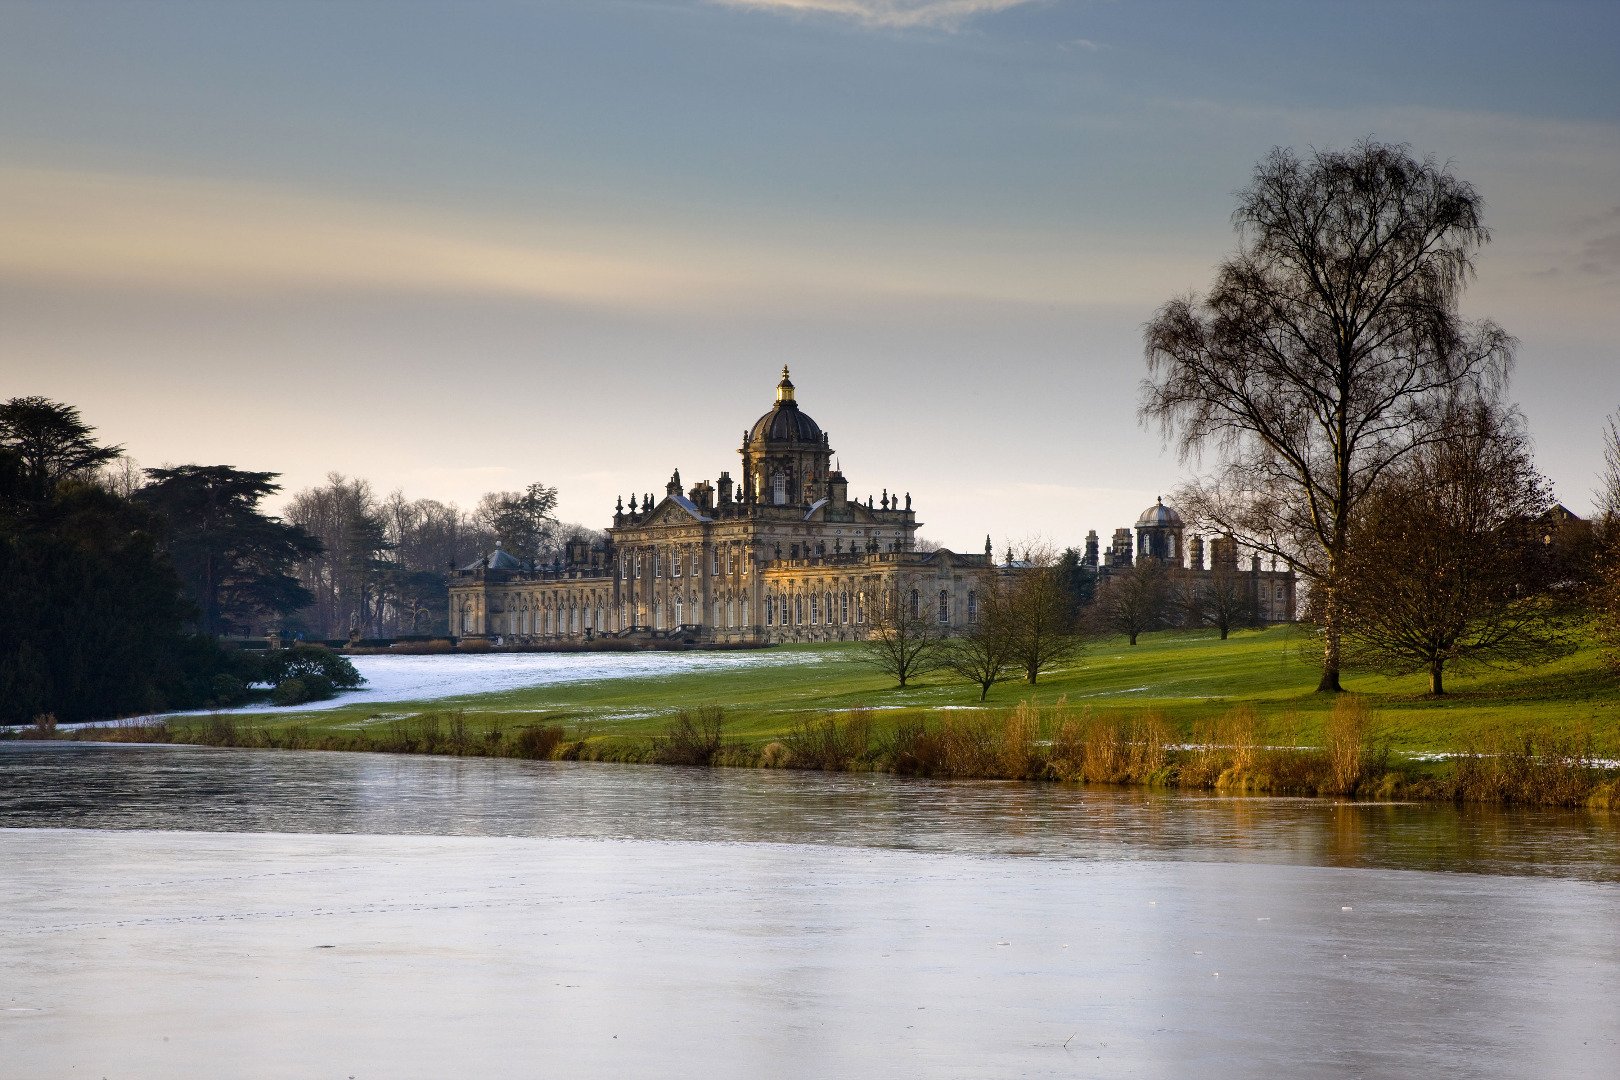 Image name castle howard and south lake mike kipling the 19 image from the post Yorkshire Stately Homes and Gardens in Yorkshire.com.